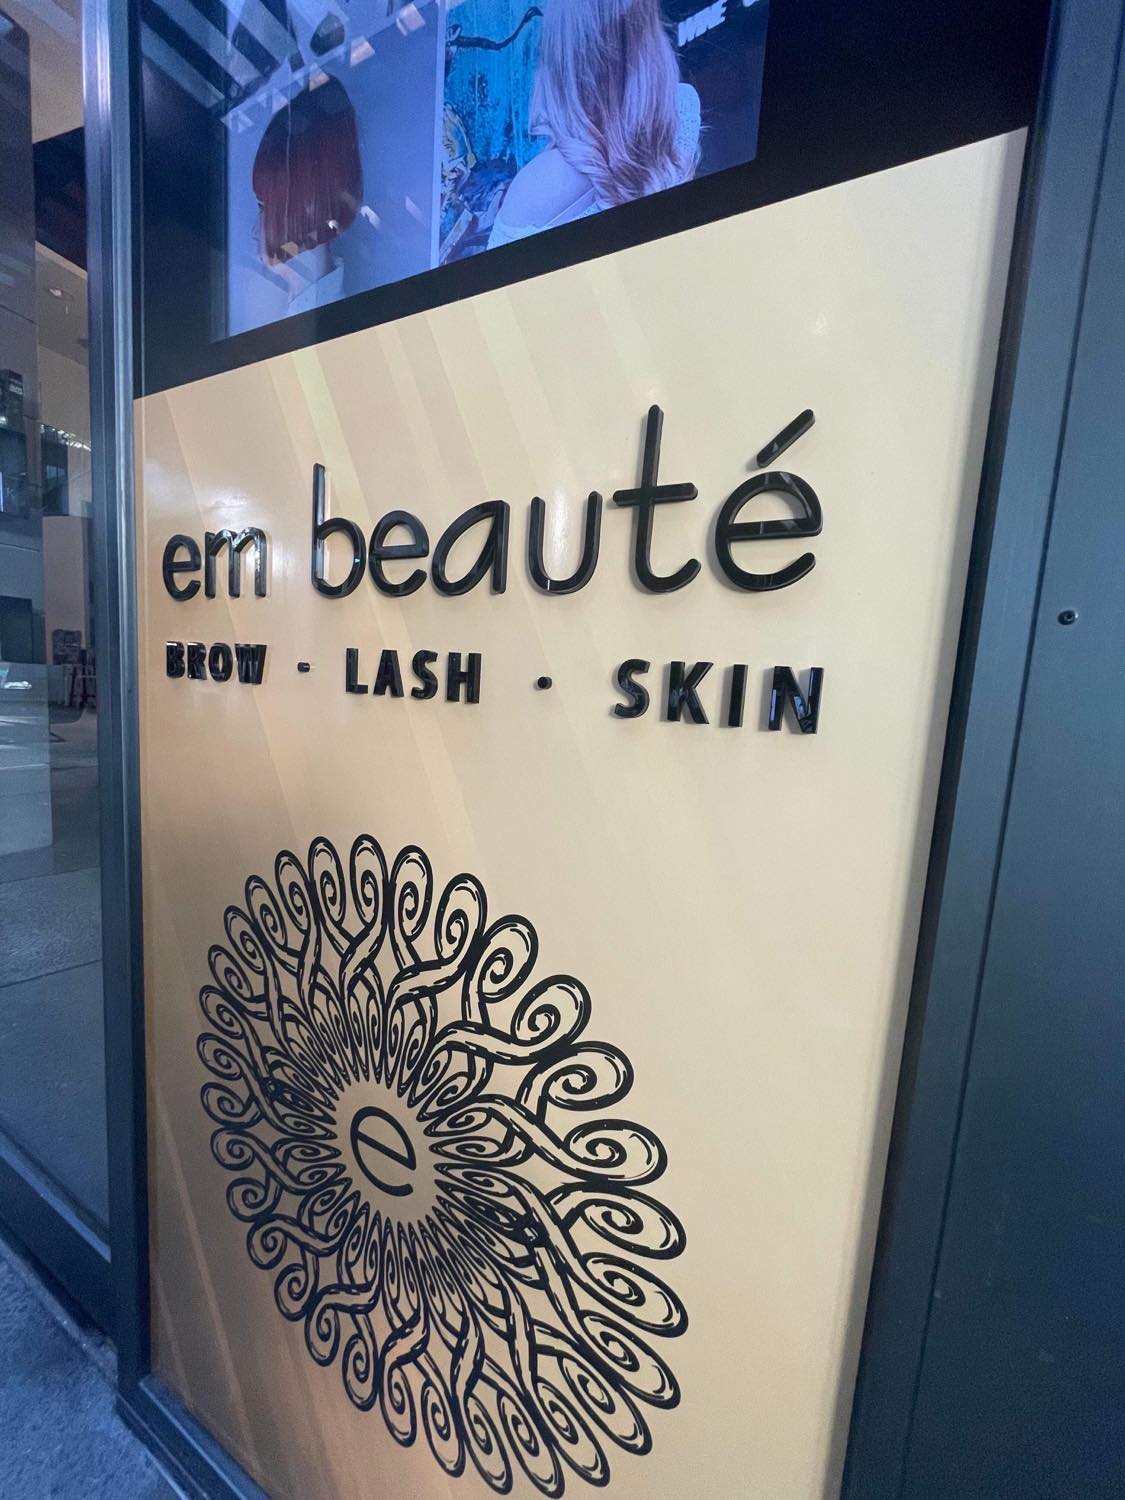 embeaute black  gloss acrylic signage adhered to a vinyl poster sign on wall of salon